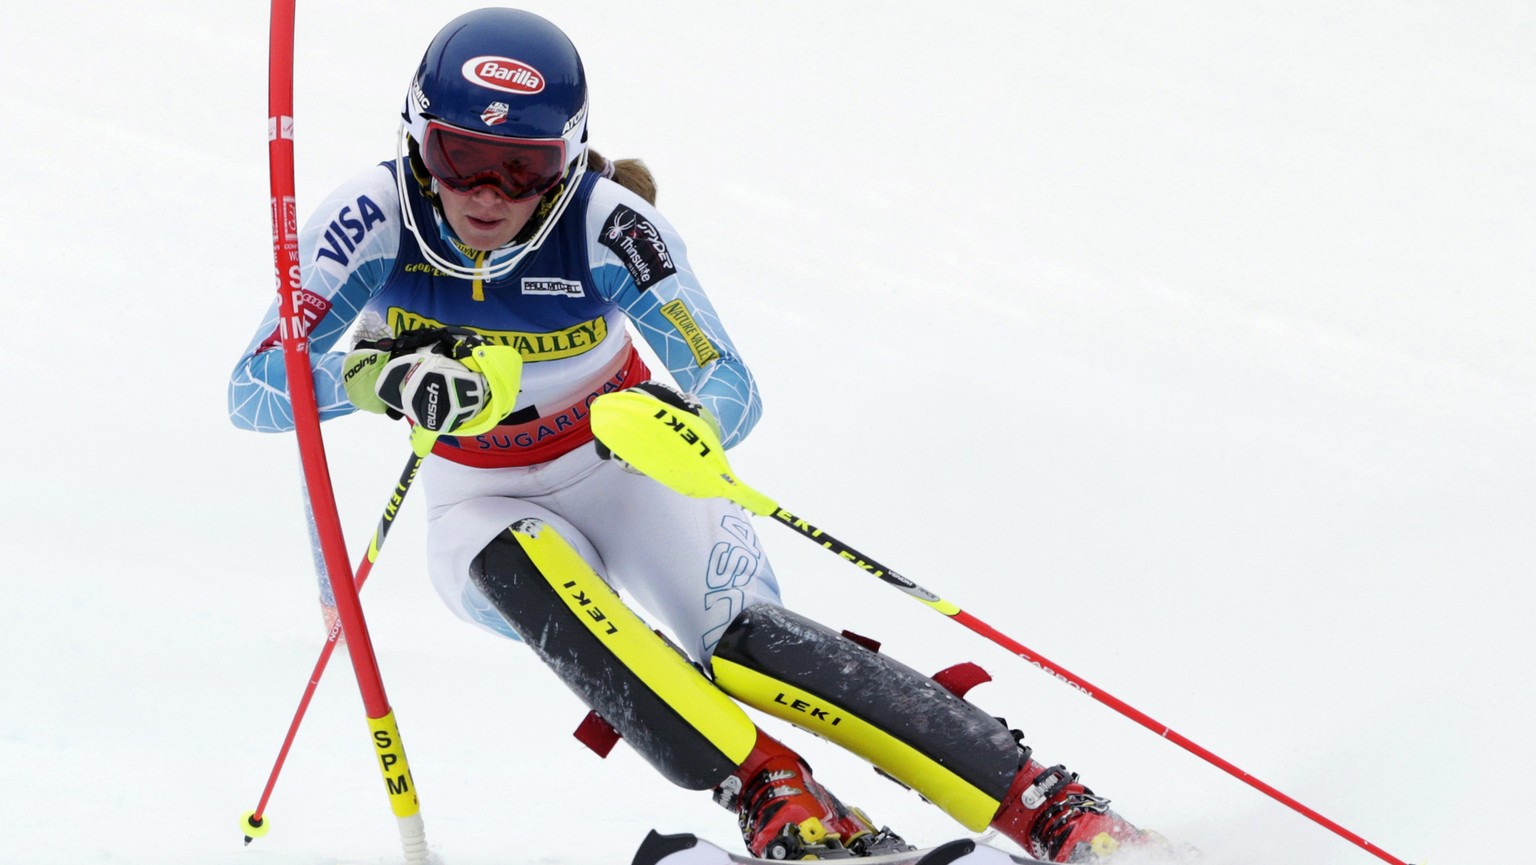 FILE -- In this file photo taken on March 28, 2015, Mikaela Shiffrin, of Vail, Colo., hits a gate during a women&#039;s slalom skiing race at the US Alpine Ski Championship in Carrabassett Valley, Mai ...